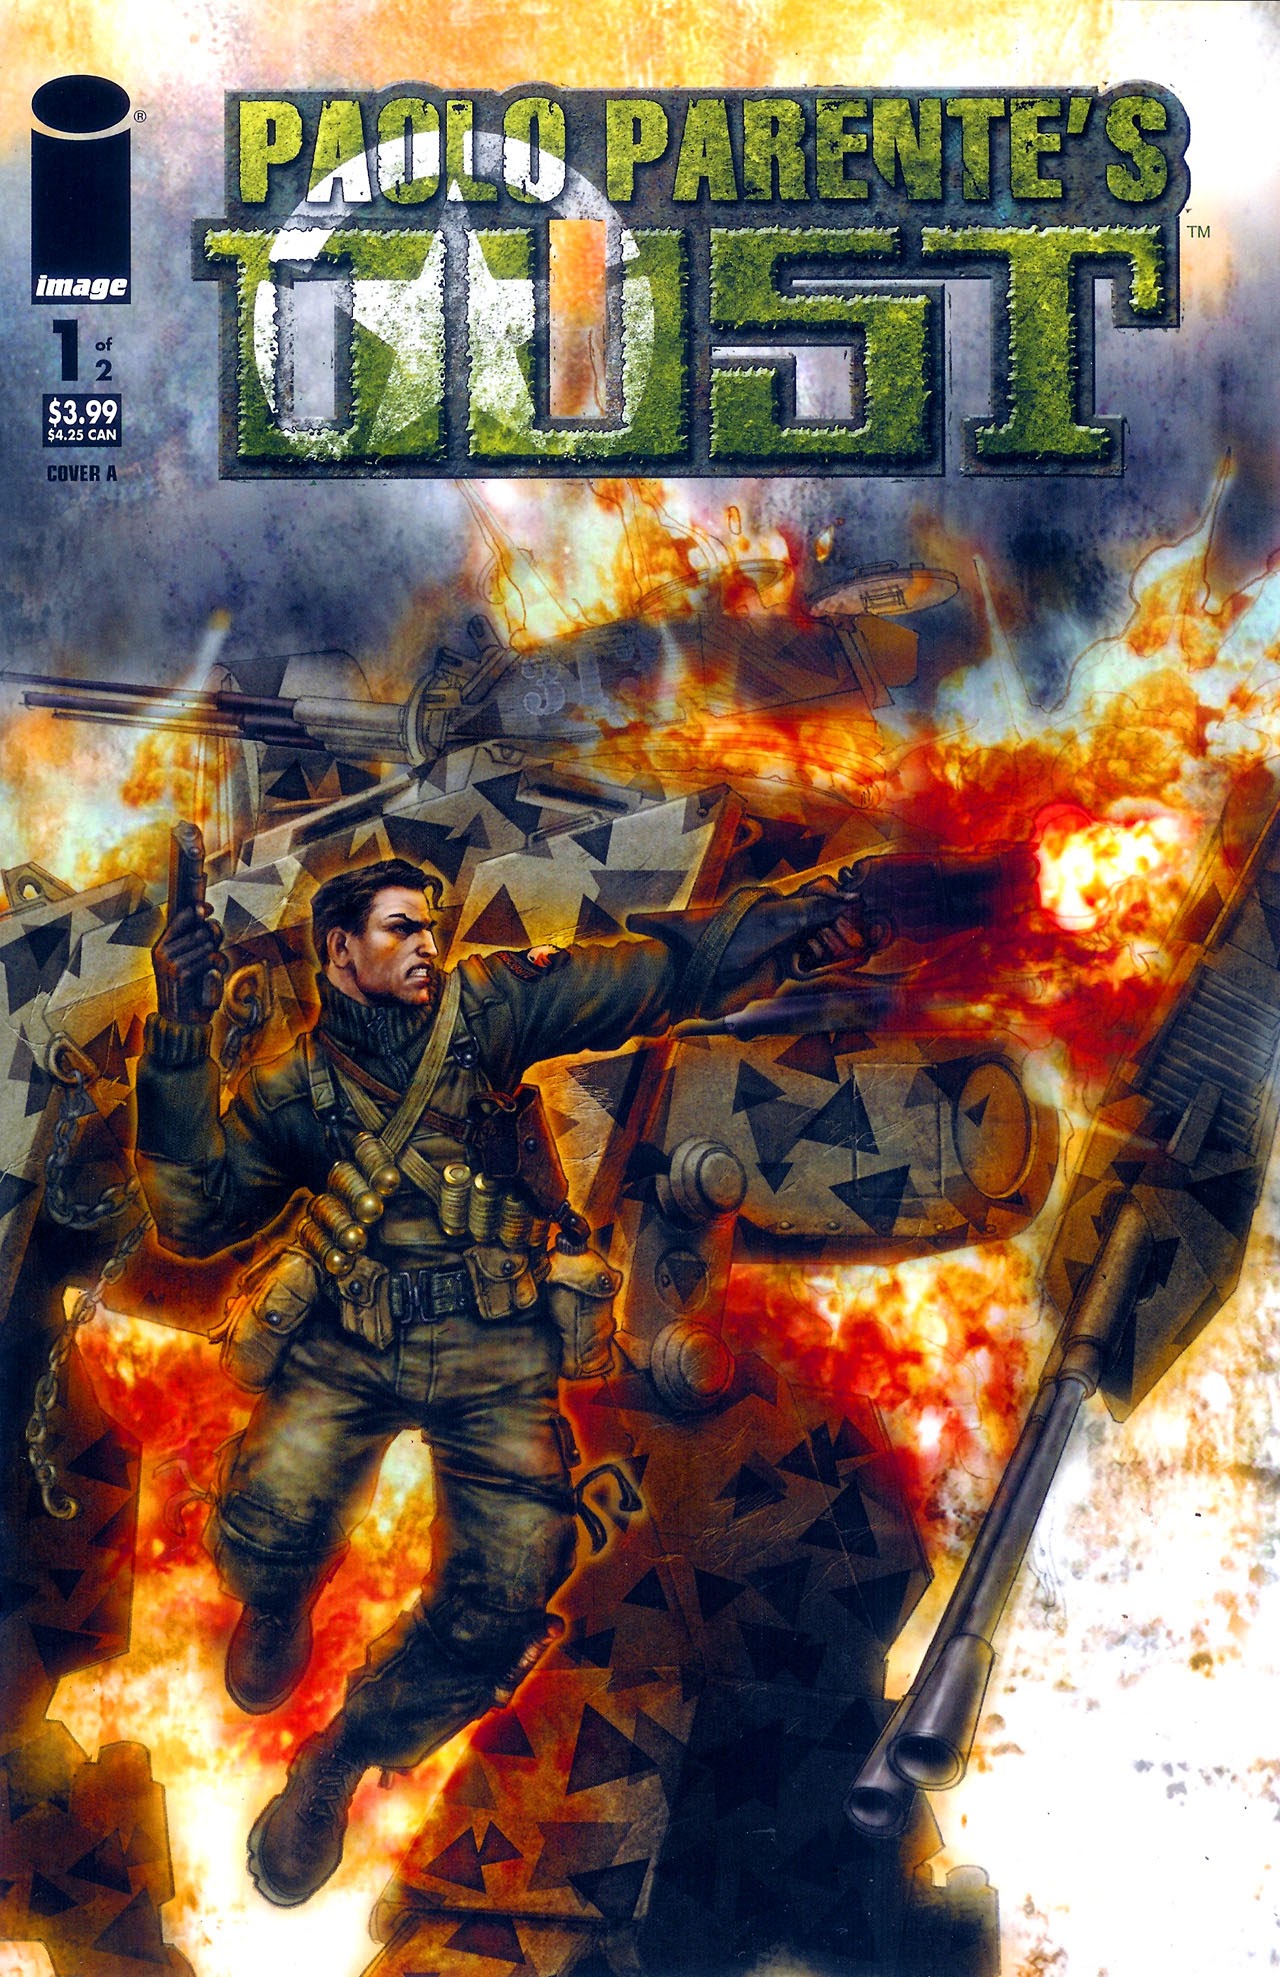 Read online Paolo Parente's Dust comic -  Issue #1 - 1